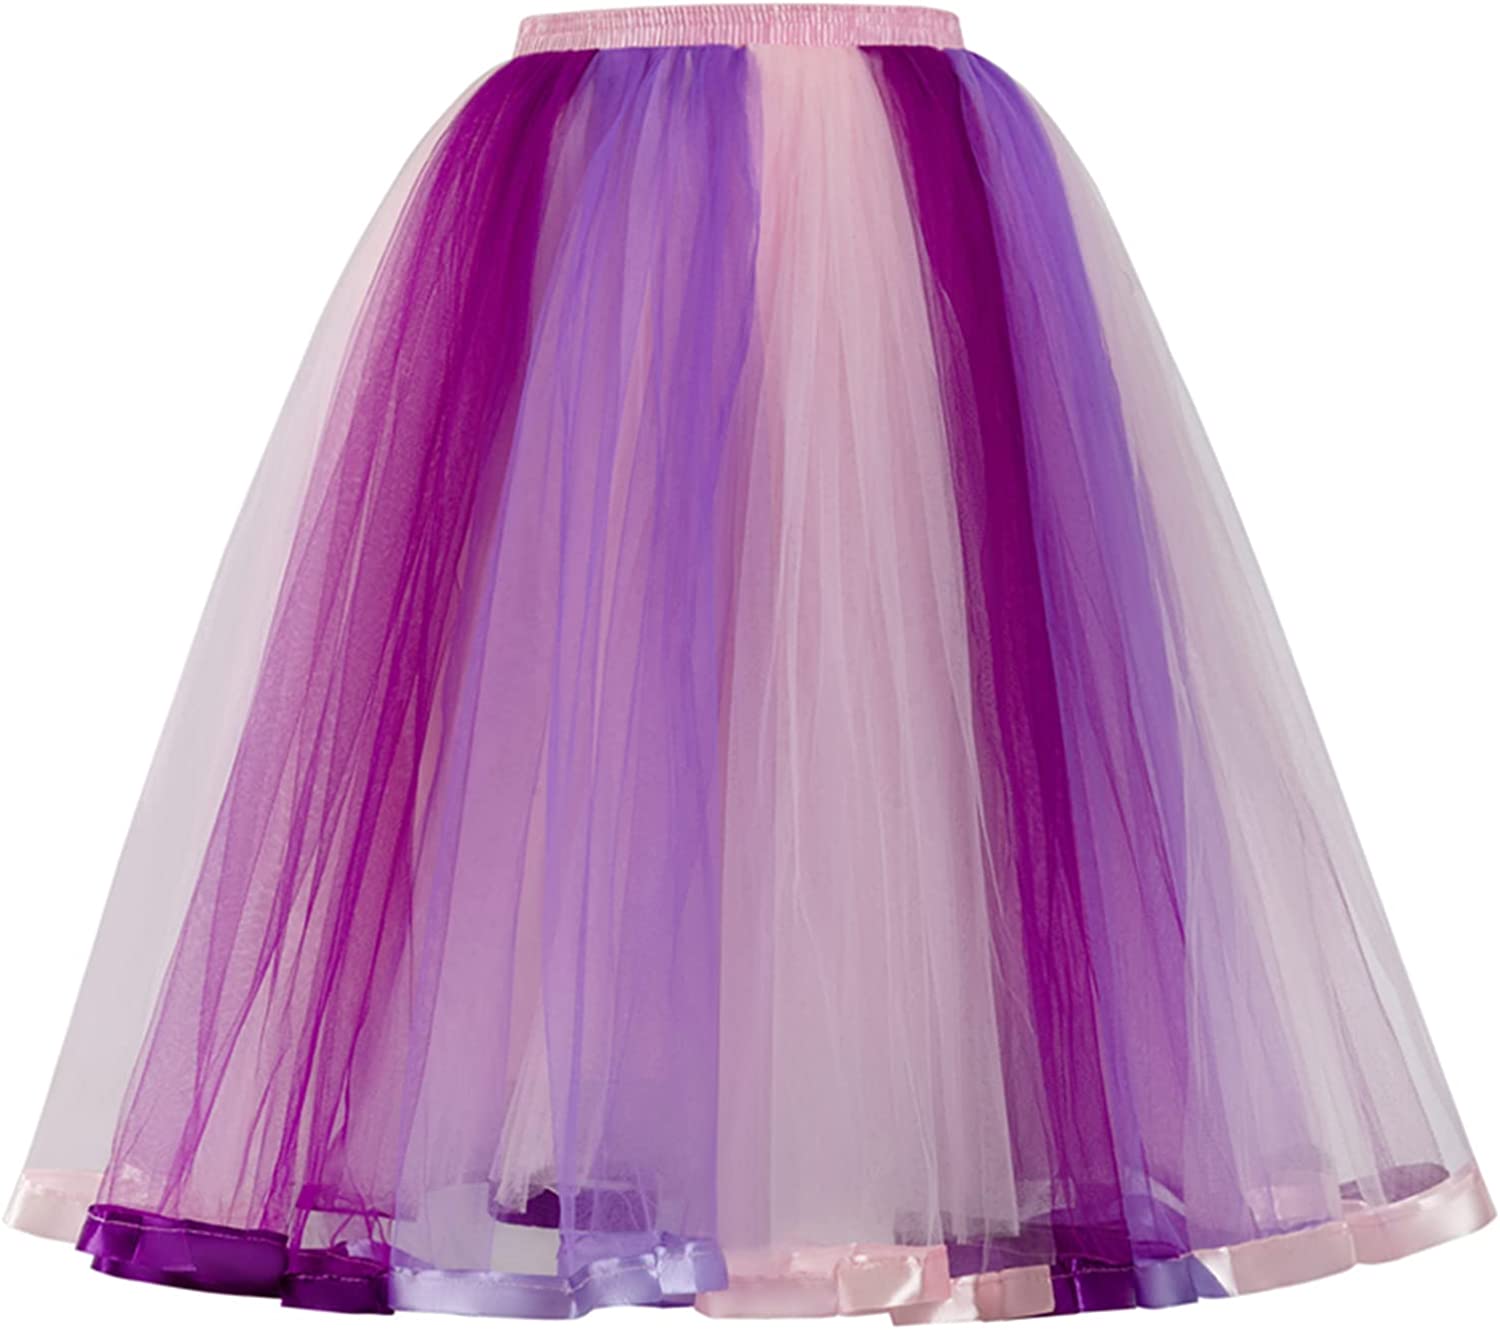 MisShow Womens Rainbow Tutu Skirt Girls CosPlay Costumes Tulle Skirts with  Free Suspenders 